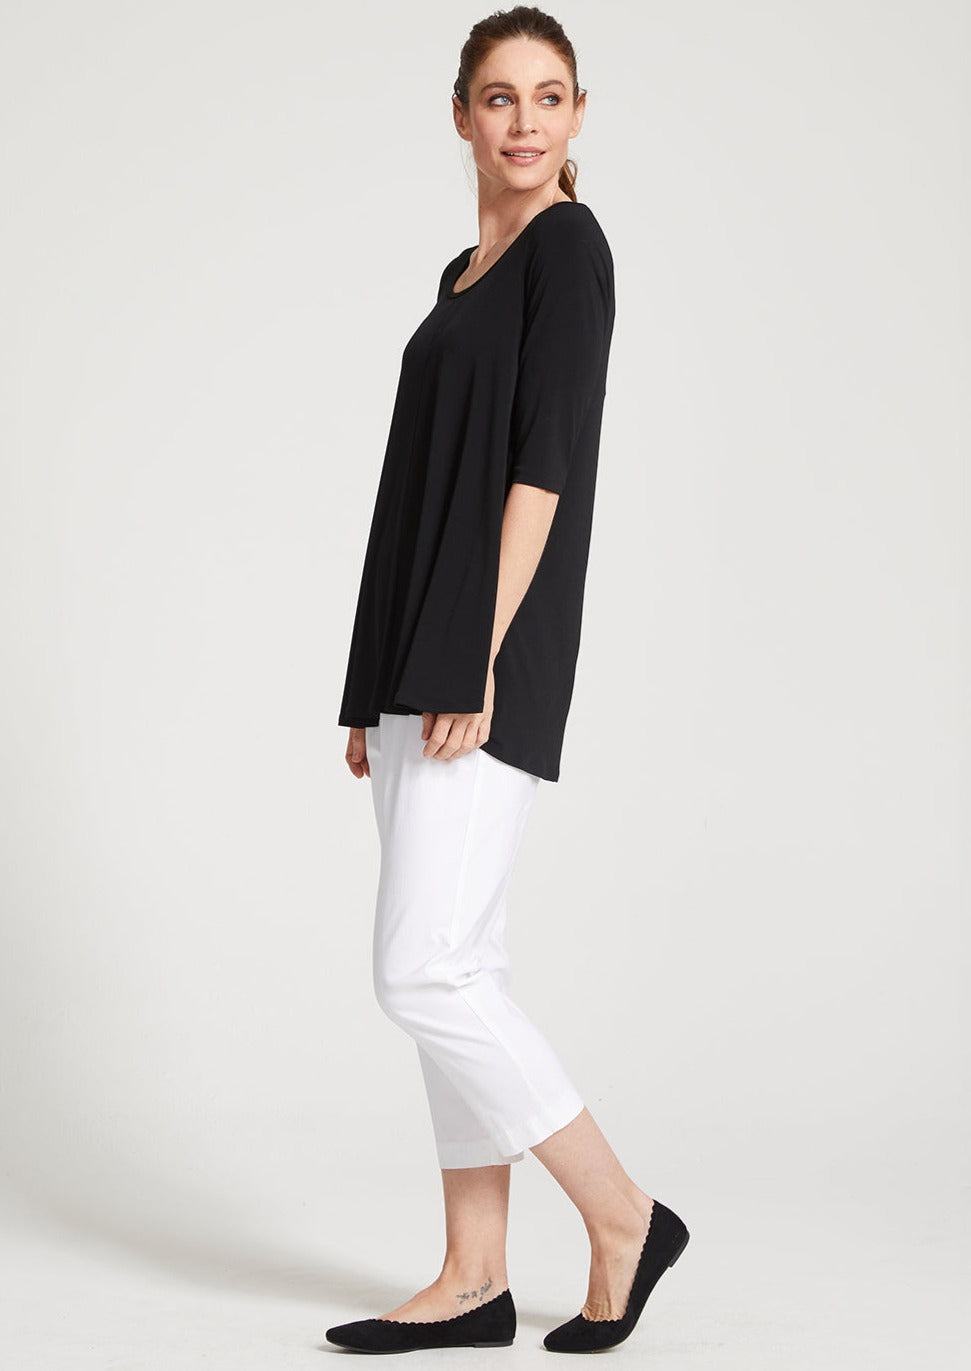 Adora is a Spring Summer 3/4 cropped white pant. Cut at calf length, with an easy comfortable pull on elastic waist and slim legs. Image is front side angle view of model. Philosophy Australia bengaline 3/4 length pant.